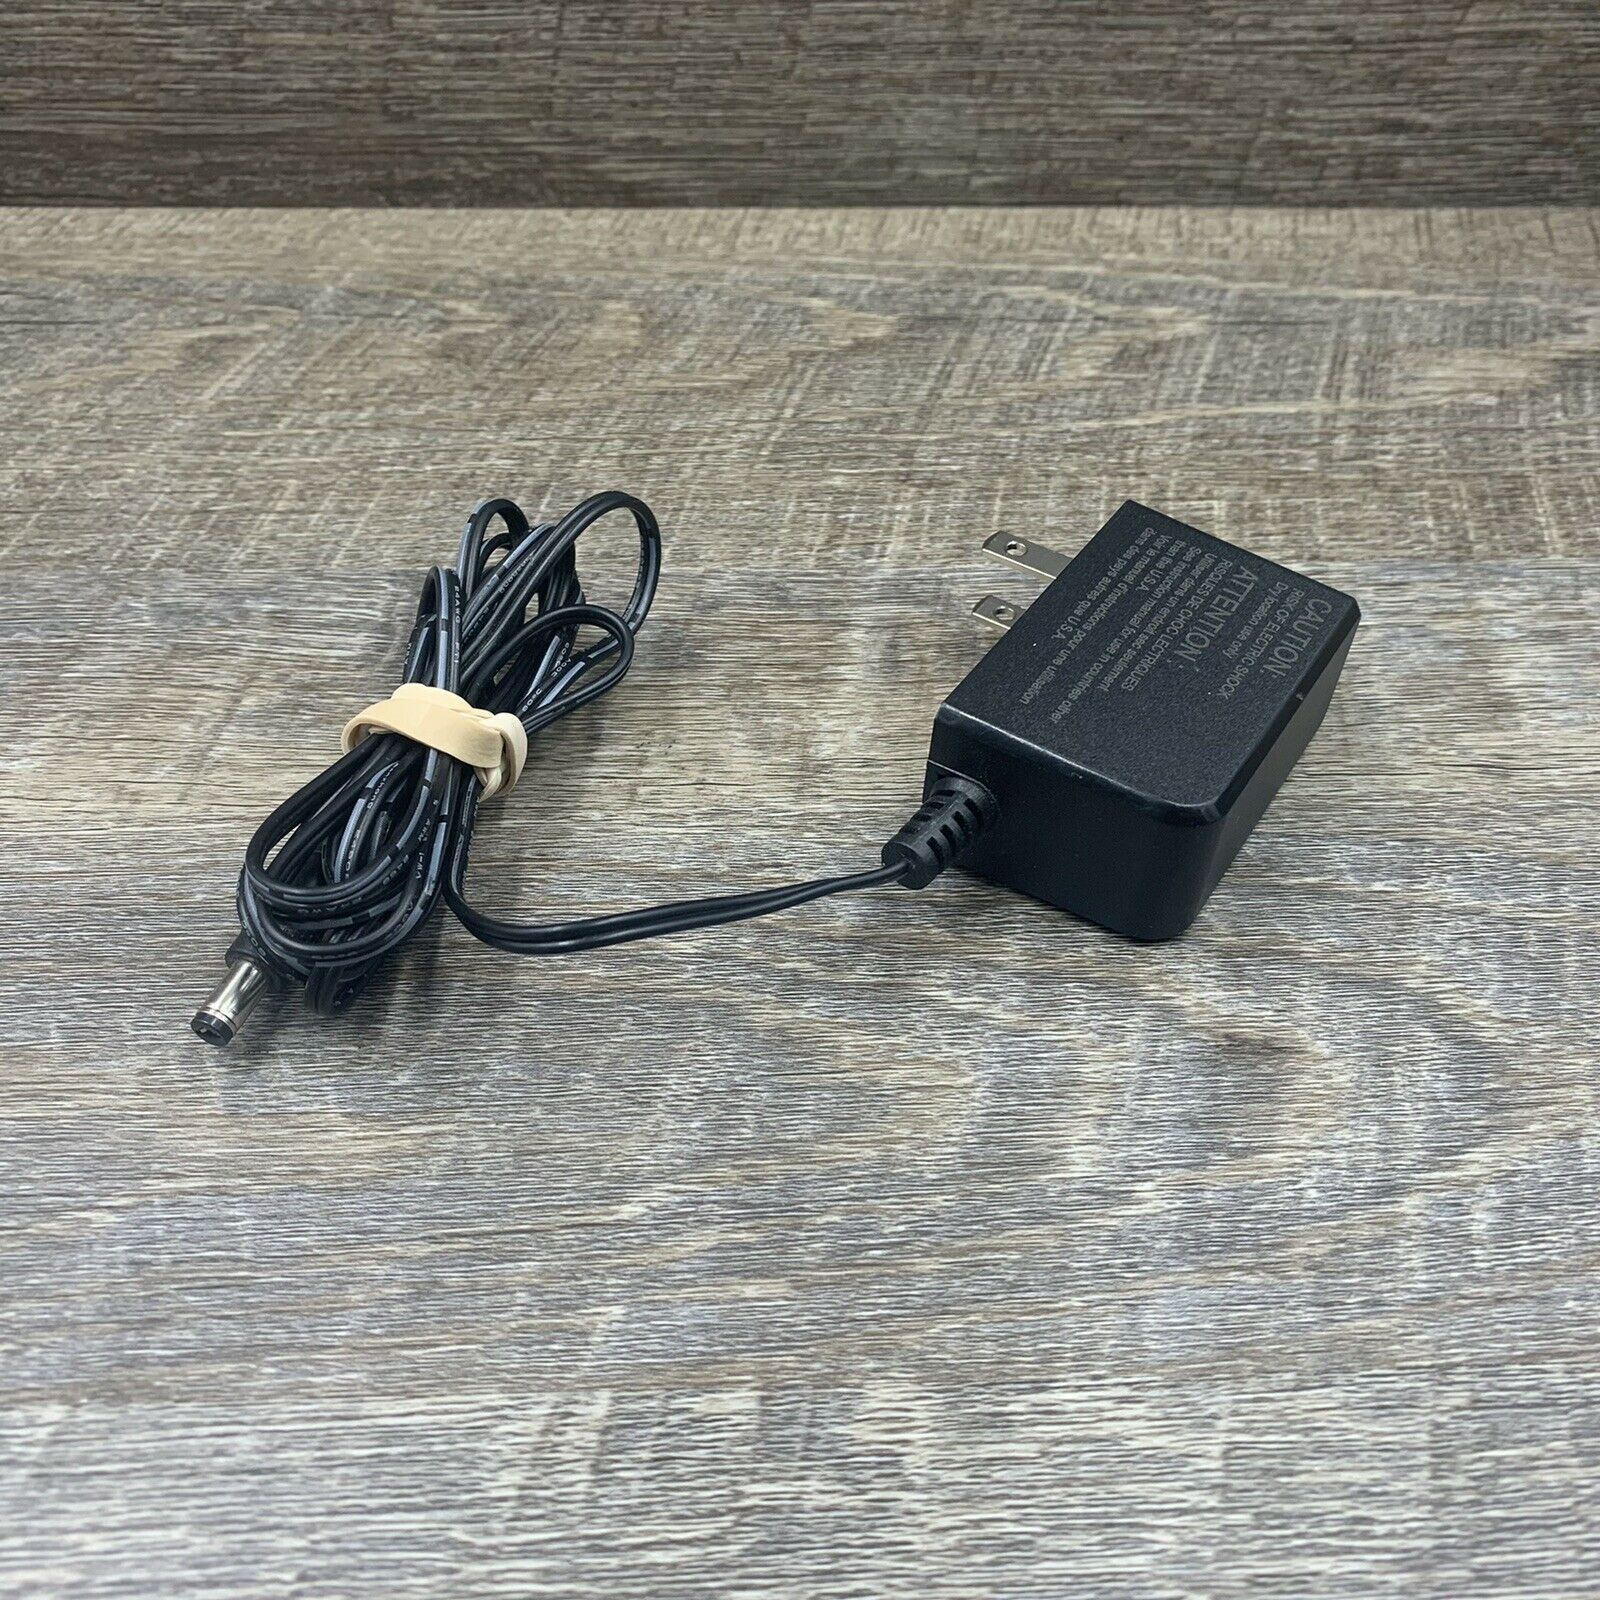 AMC AC Adapter Model AD-0121900060US 19V 0.6A Class 2 Power Supply Country/Region of Manufacture: China Custom Bundle